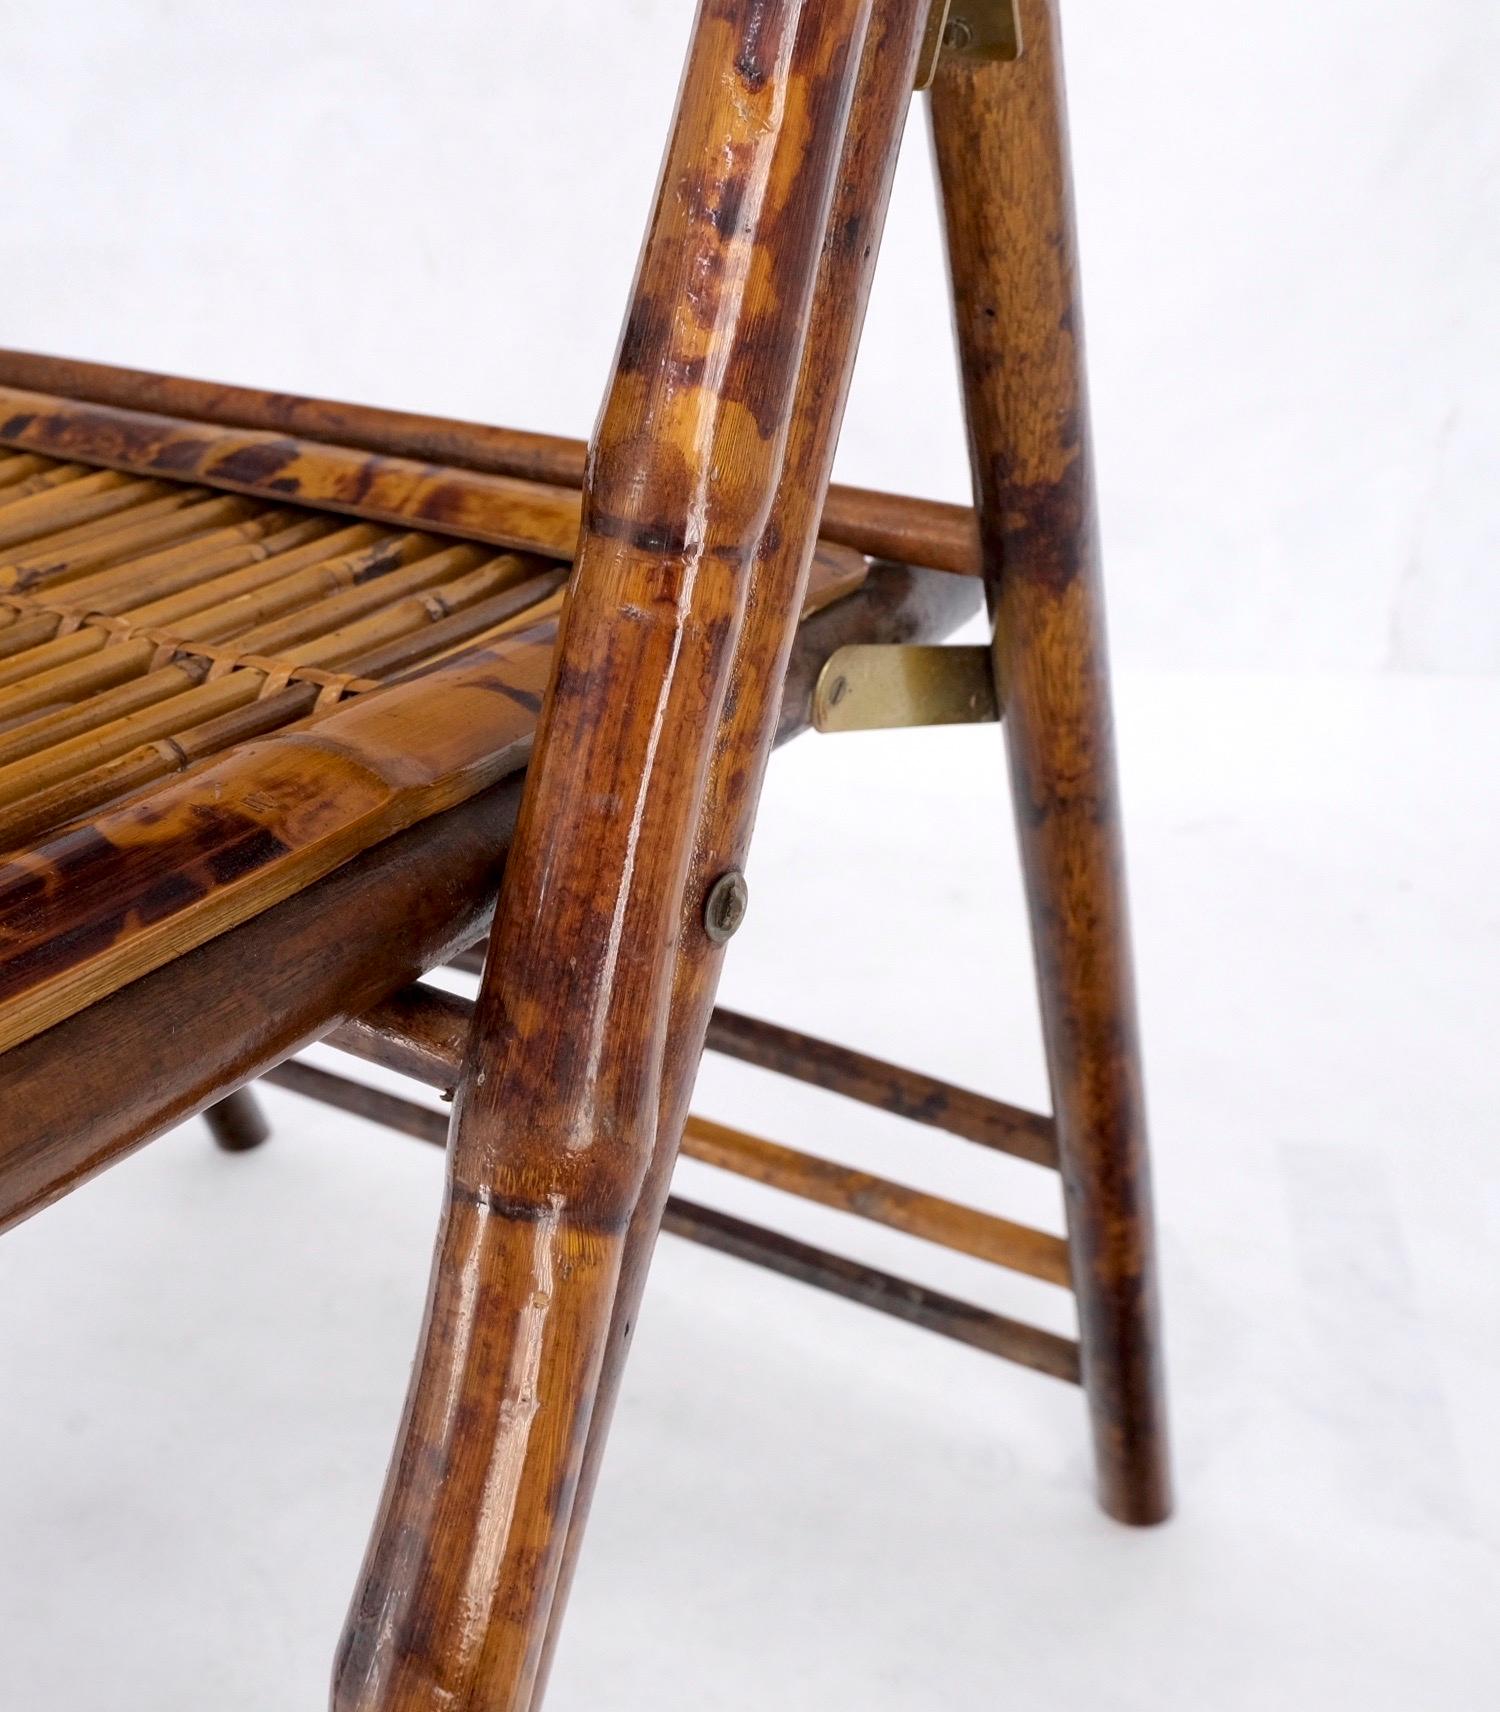 vintage folding table and chairs